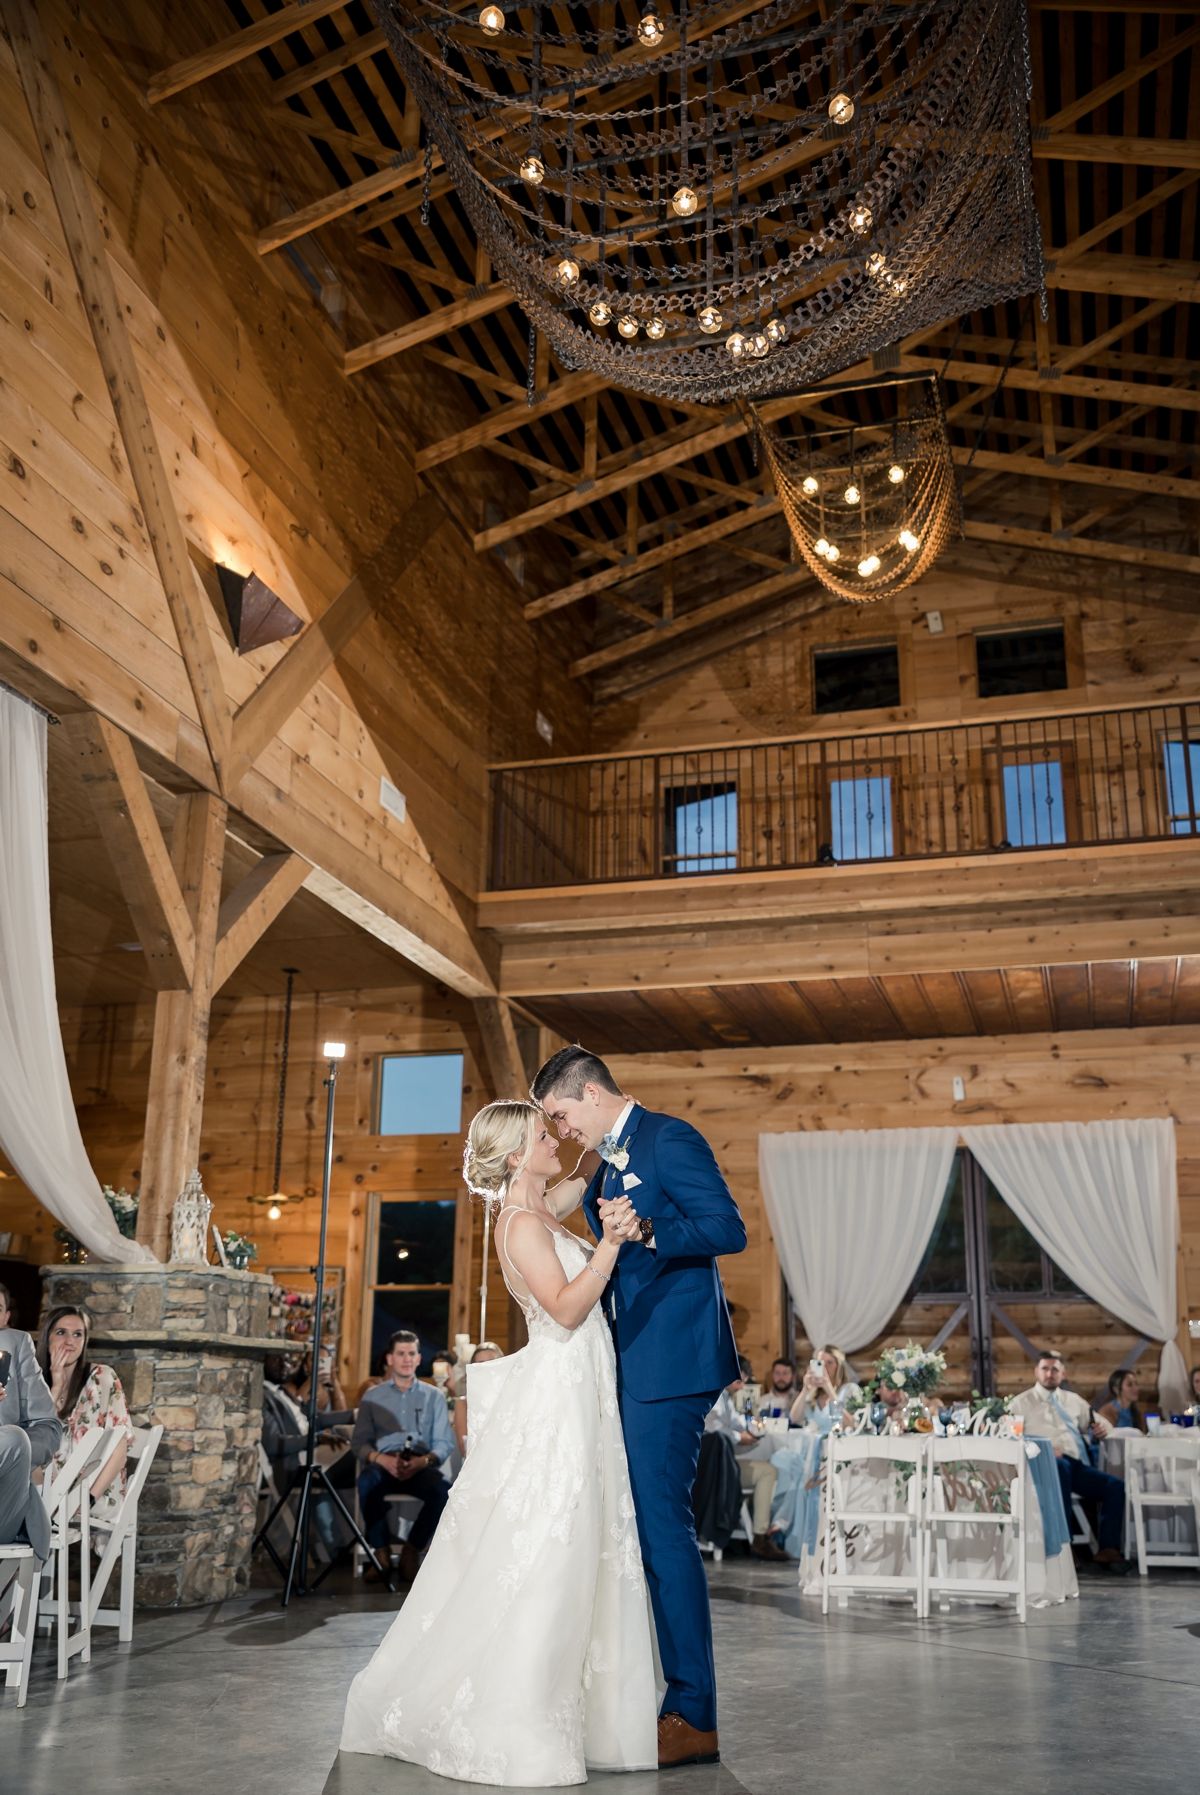 Chris and Grace during their first dance as husband and wife at Walters Barn perfectly backlight by a soft gentle light.